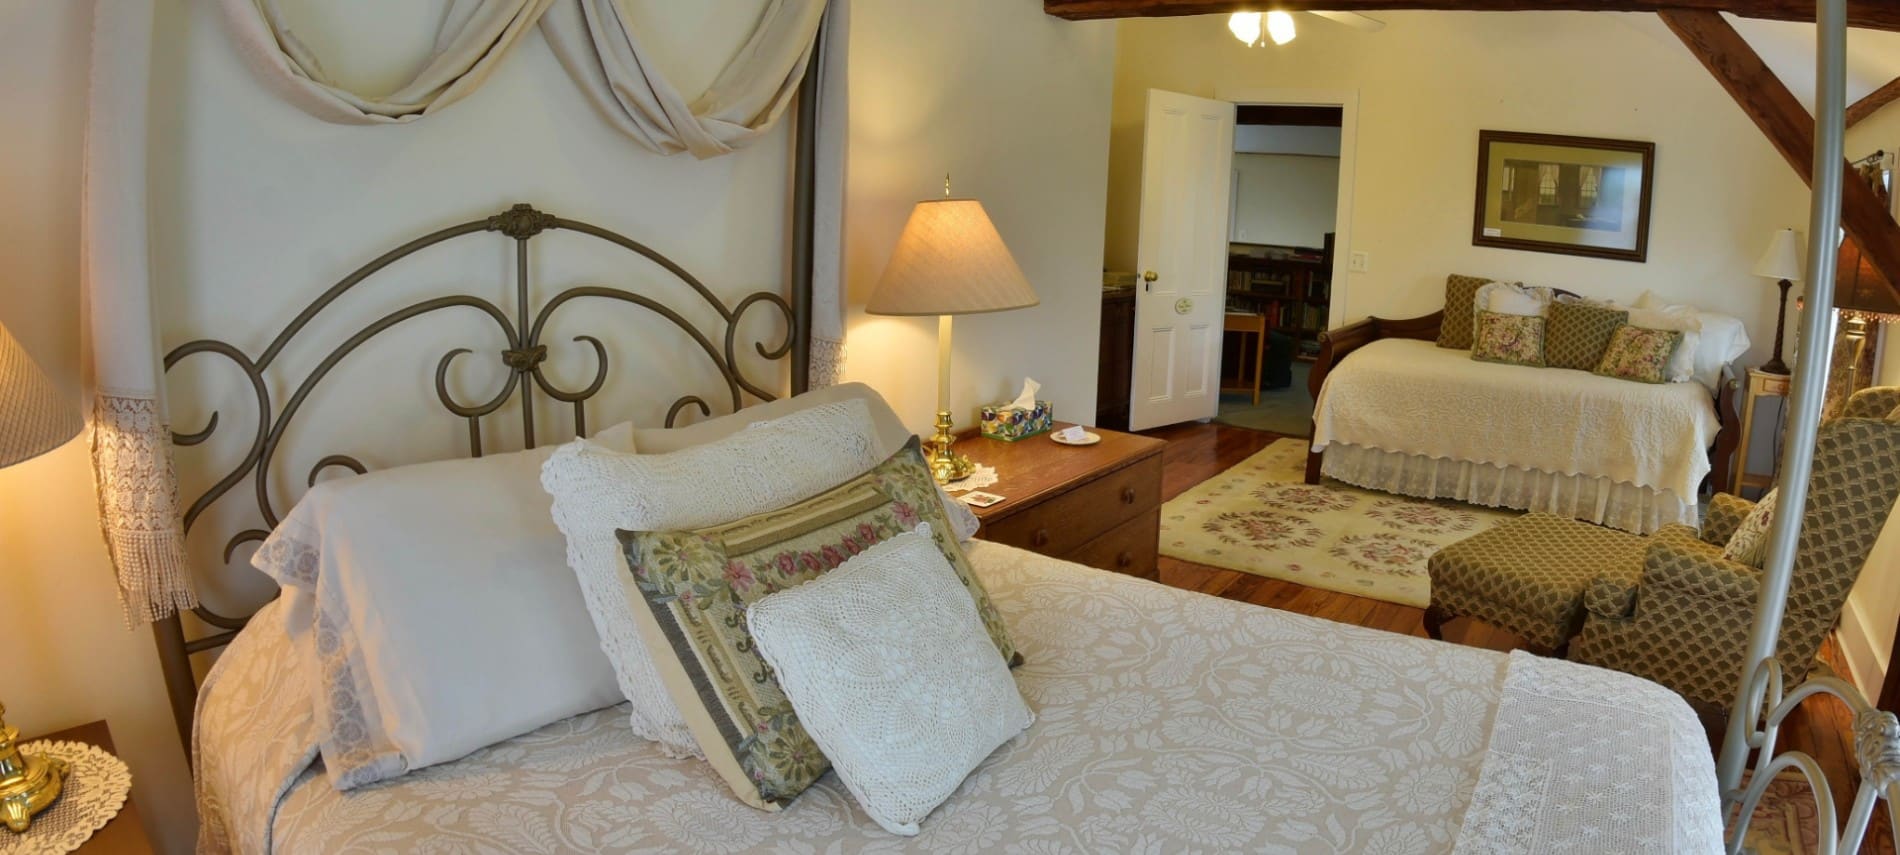 Large guest room with two queen beds, white comforters and wood beams on the ceiling